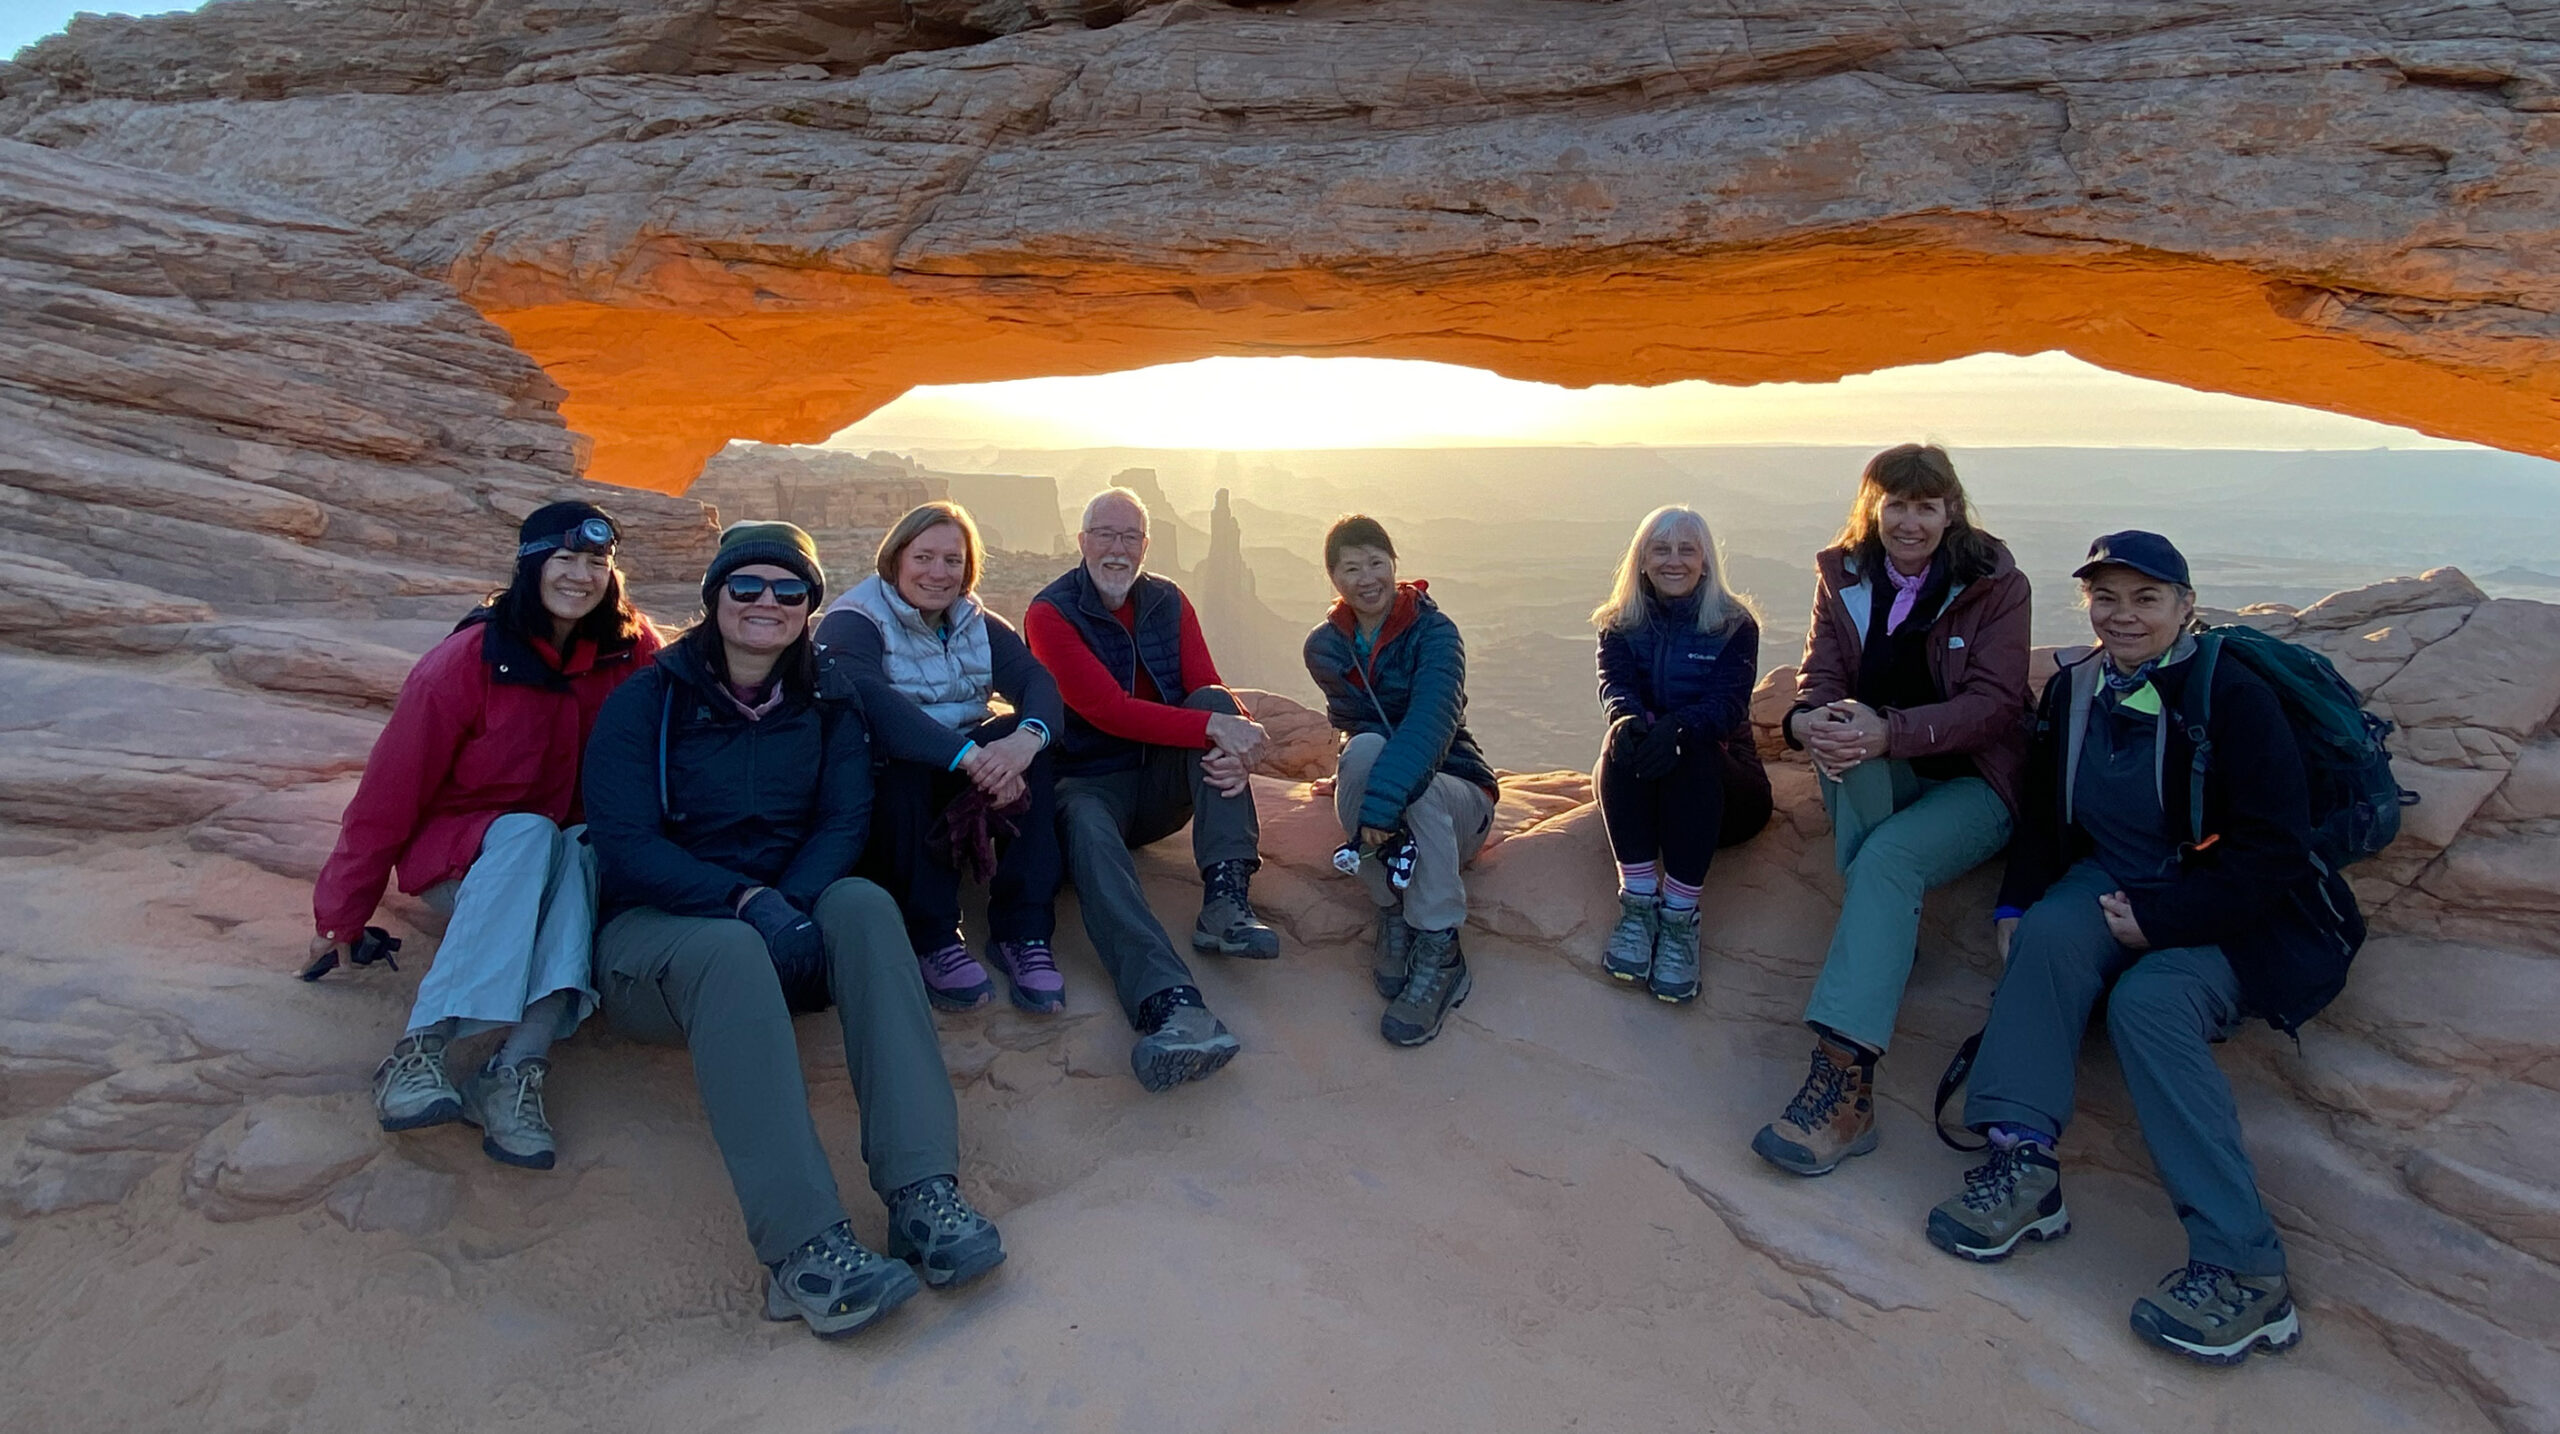 adventures for all group sitting near the rock arches in utah during a sunset